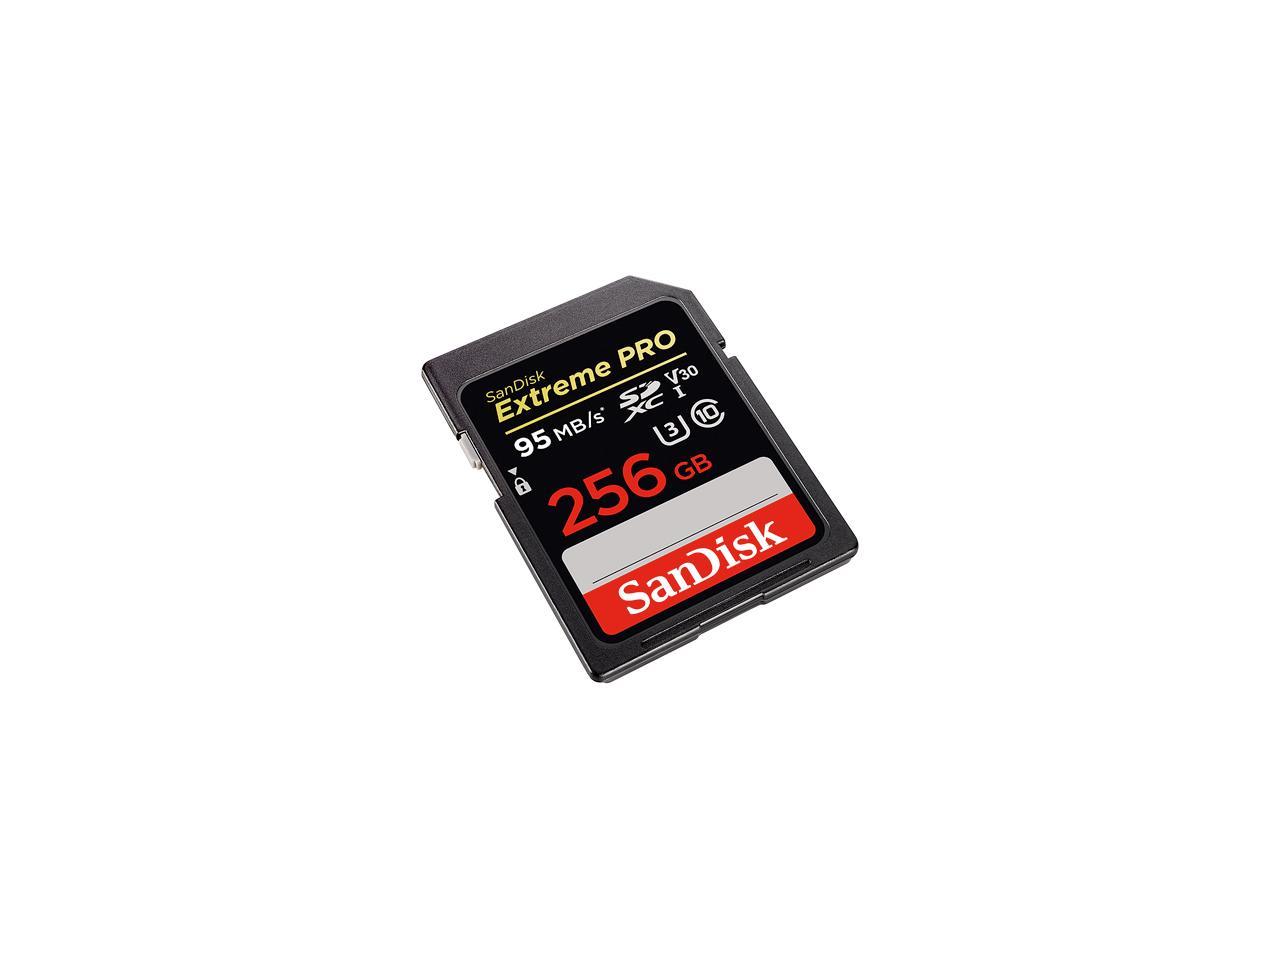 SanDisk 256GB Extreme Pro SDXC UHS-I/U3 Class 10 Memory Card, Speed Up to 95MB/s (SDSDXXG-256G-GN4IN)